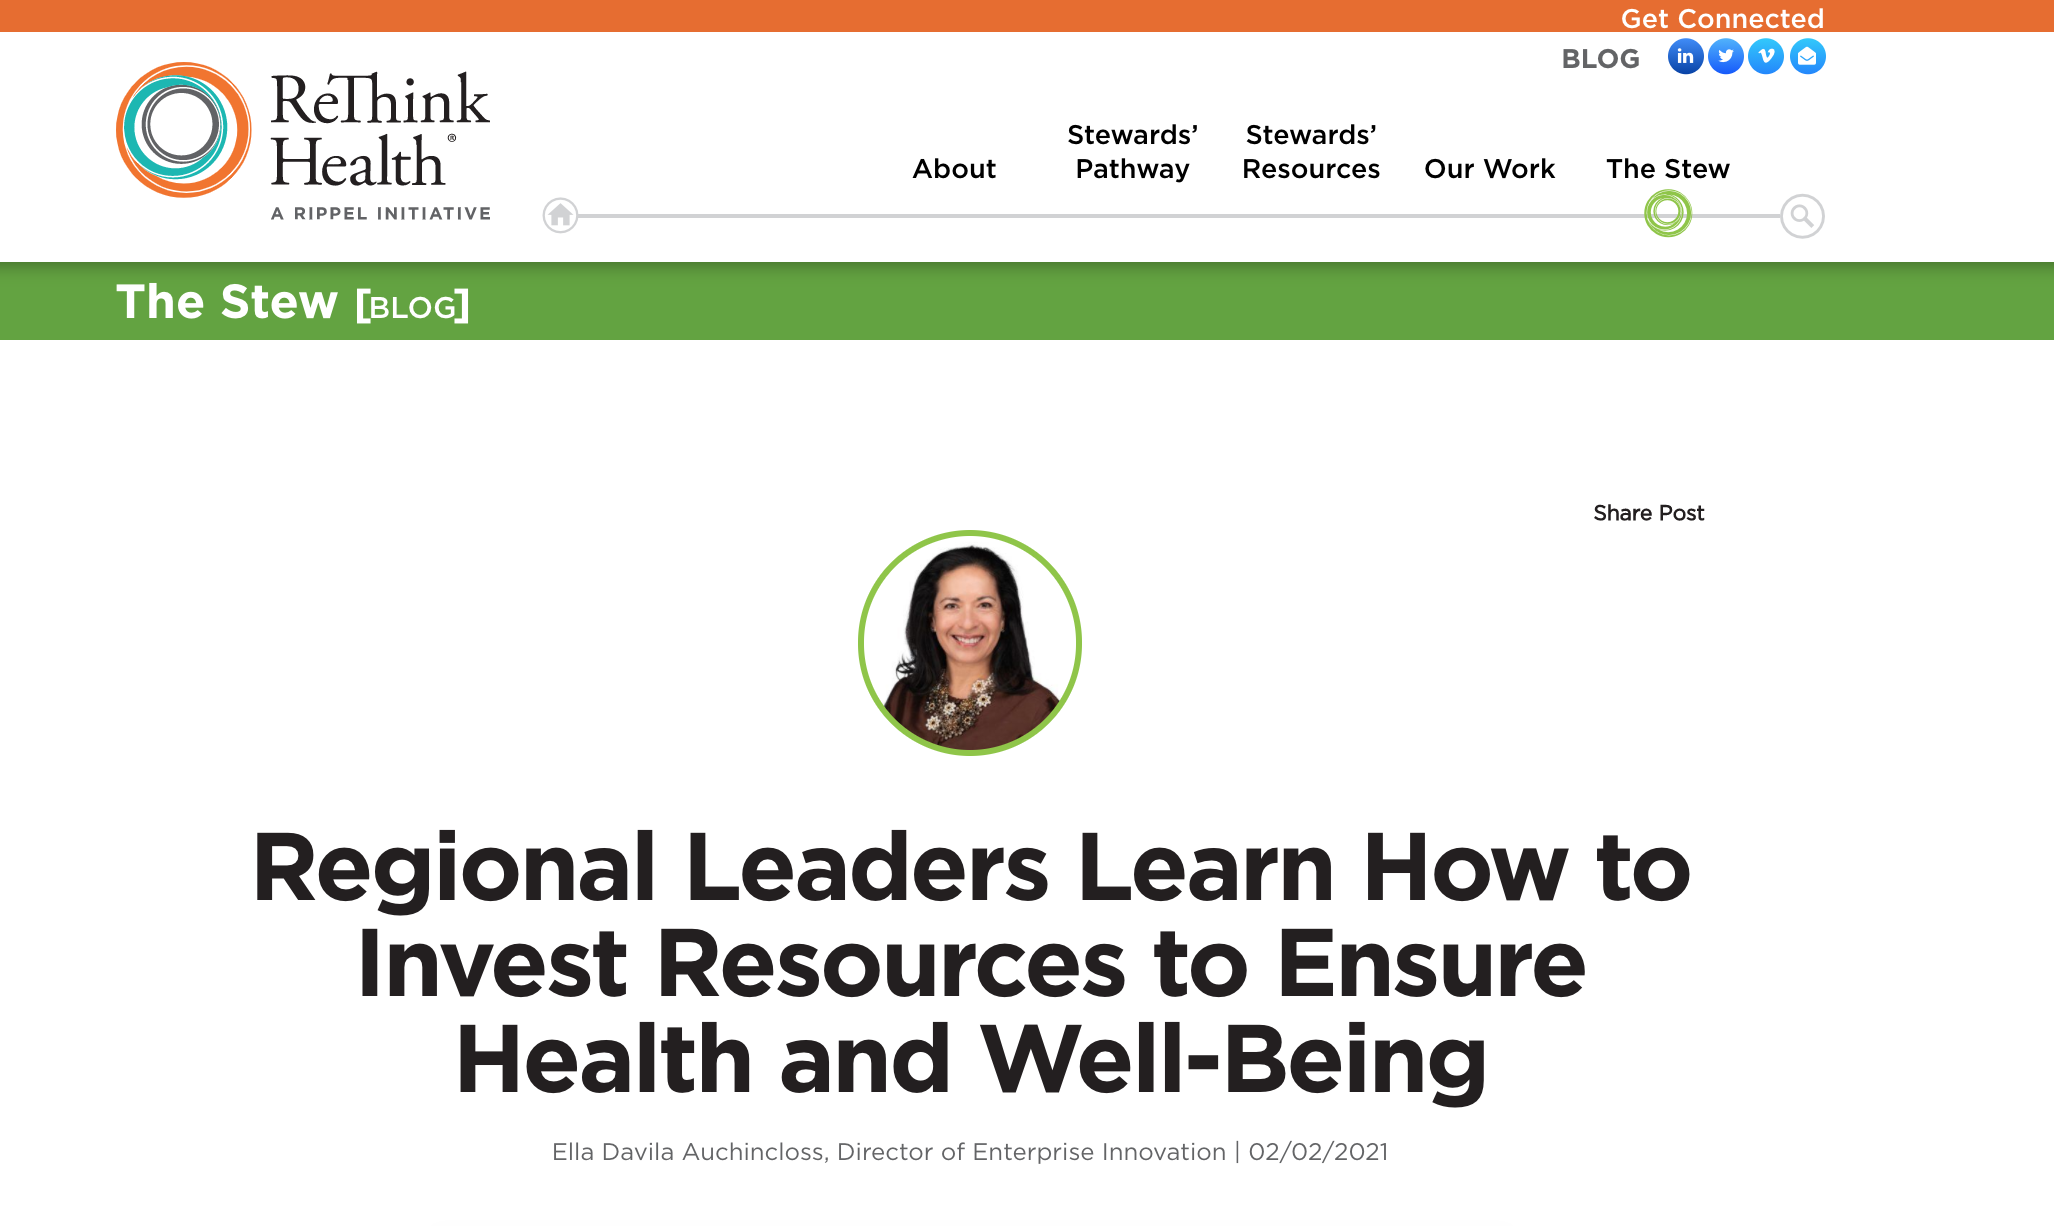 Regional Leaders Learn How to Invest Resources to Ensure Health and Well-Being